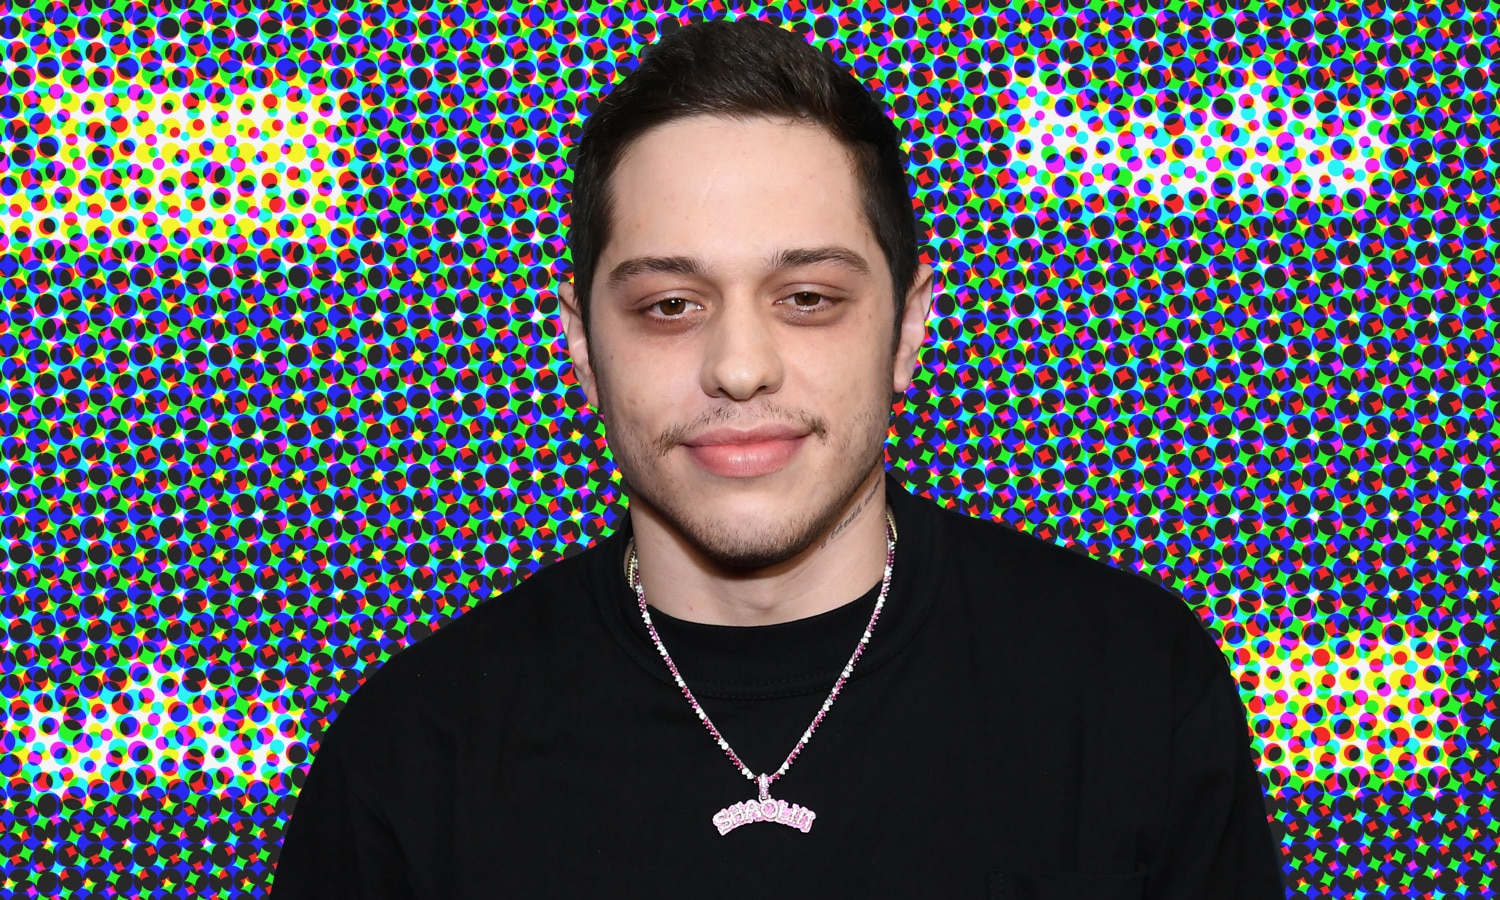 Please Stop Sending Weed to My Mom's House, Asks Pete Davidson